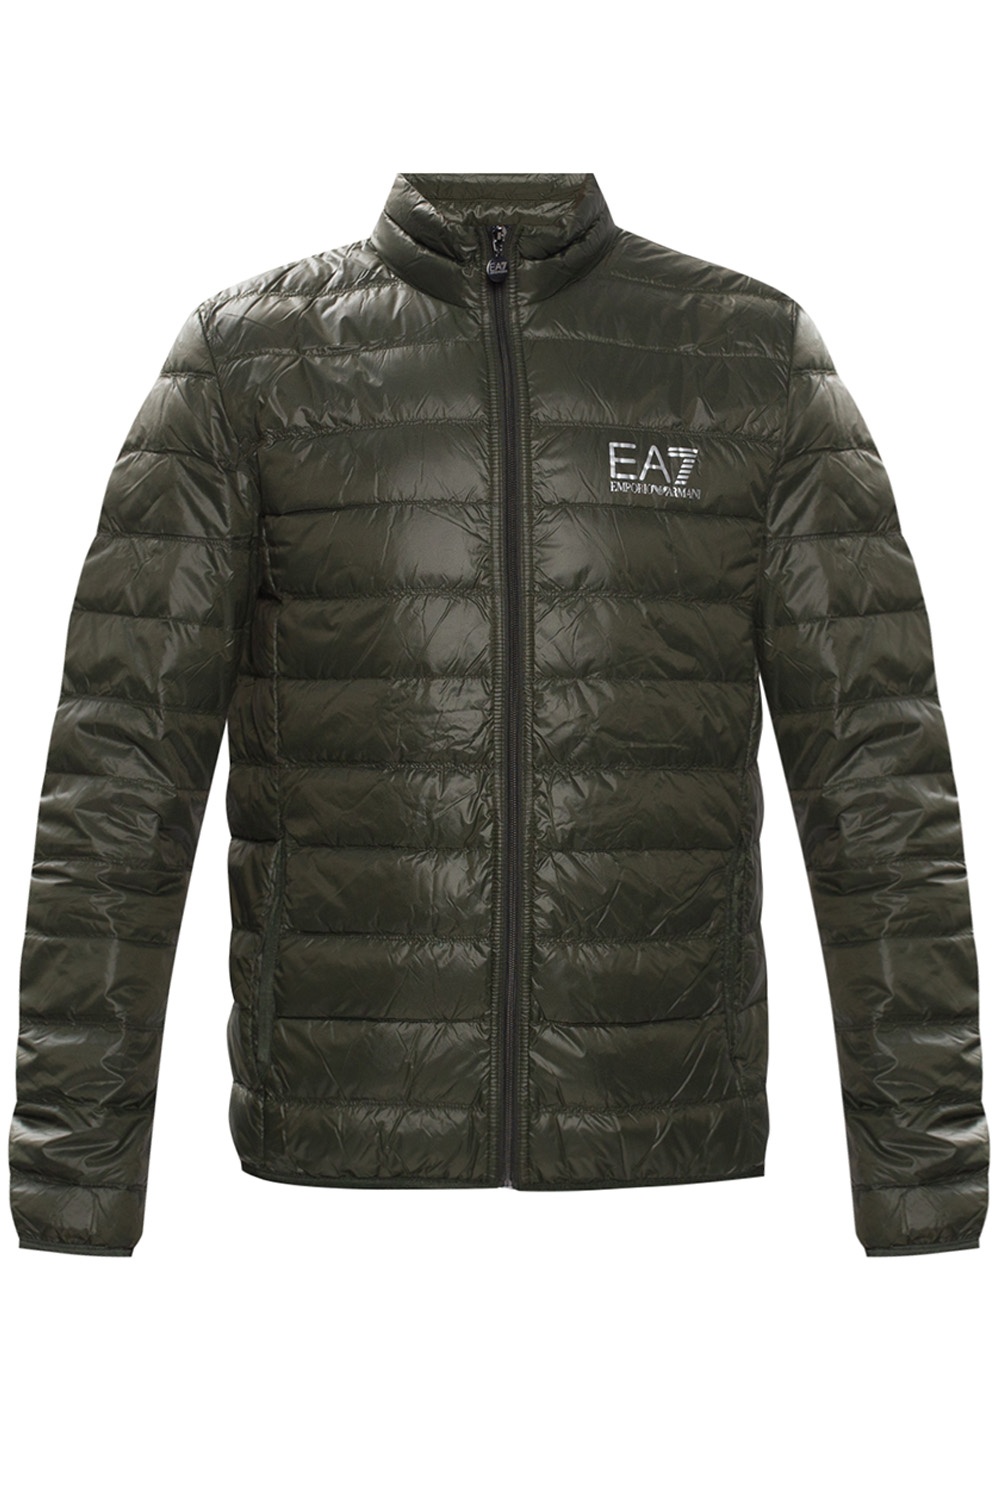 Buy EA7 Emporio Armani Gold Label Bomber Jacket with Embroidered Logo, Navy Blue Color Men